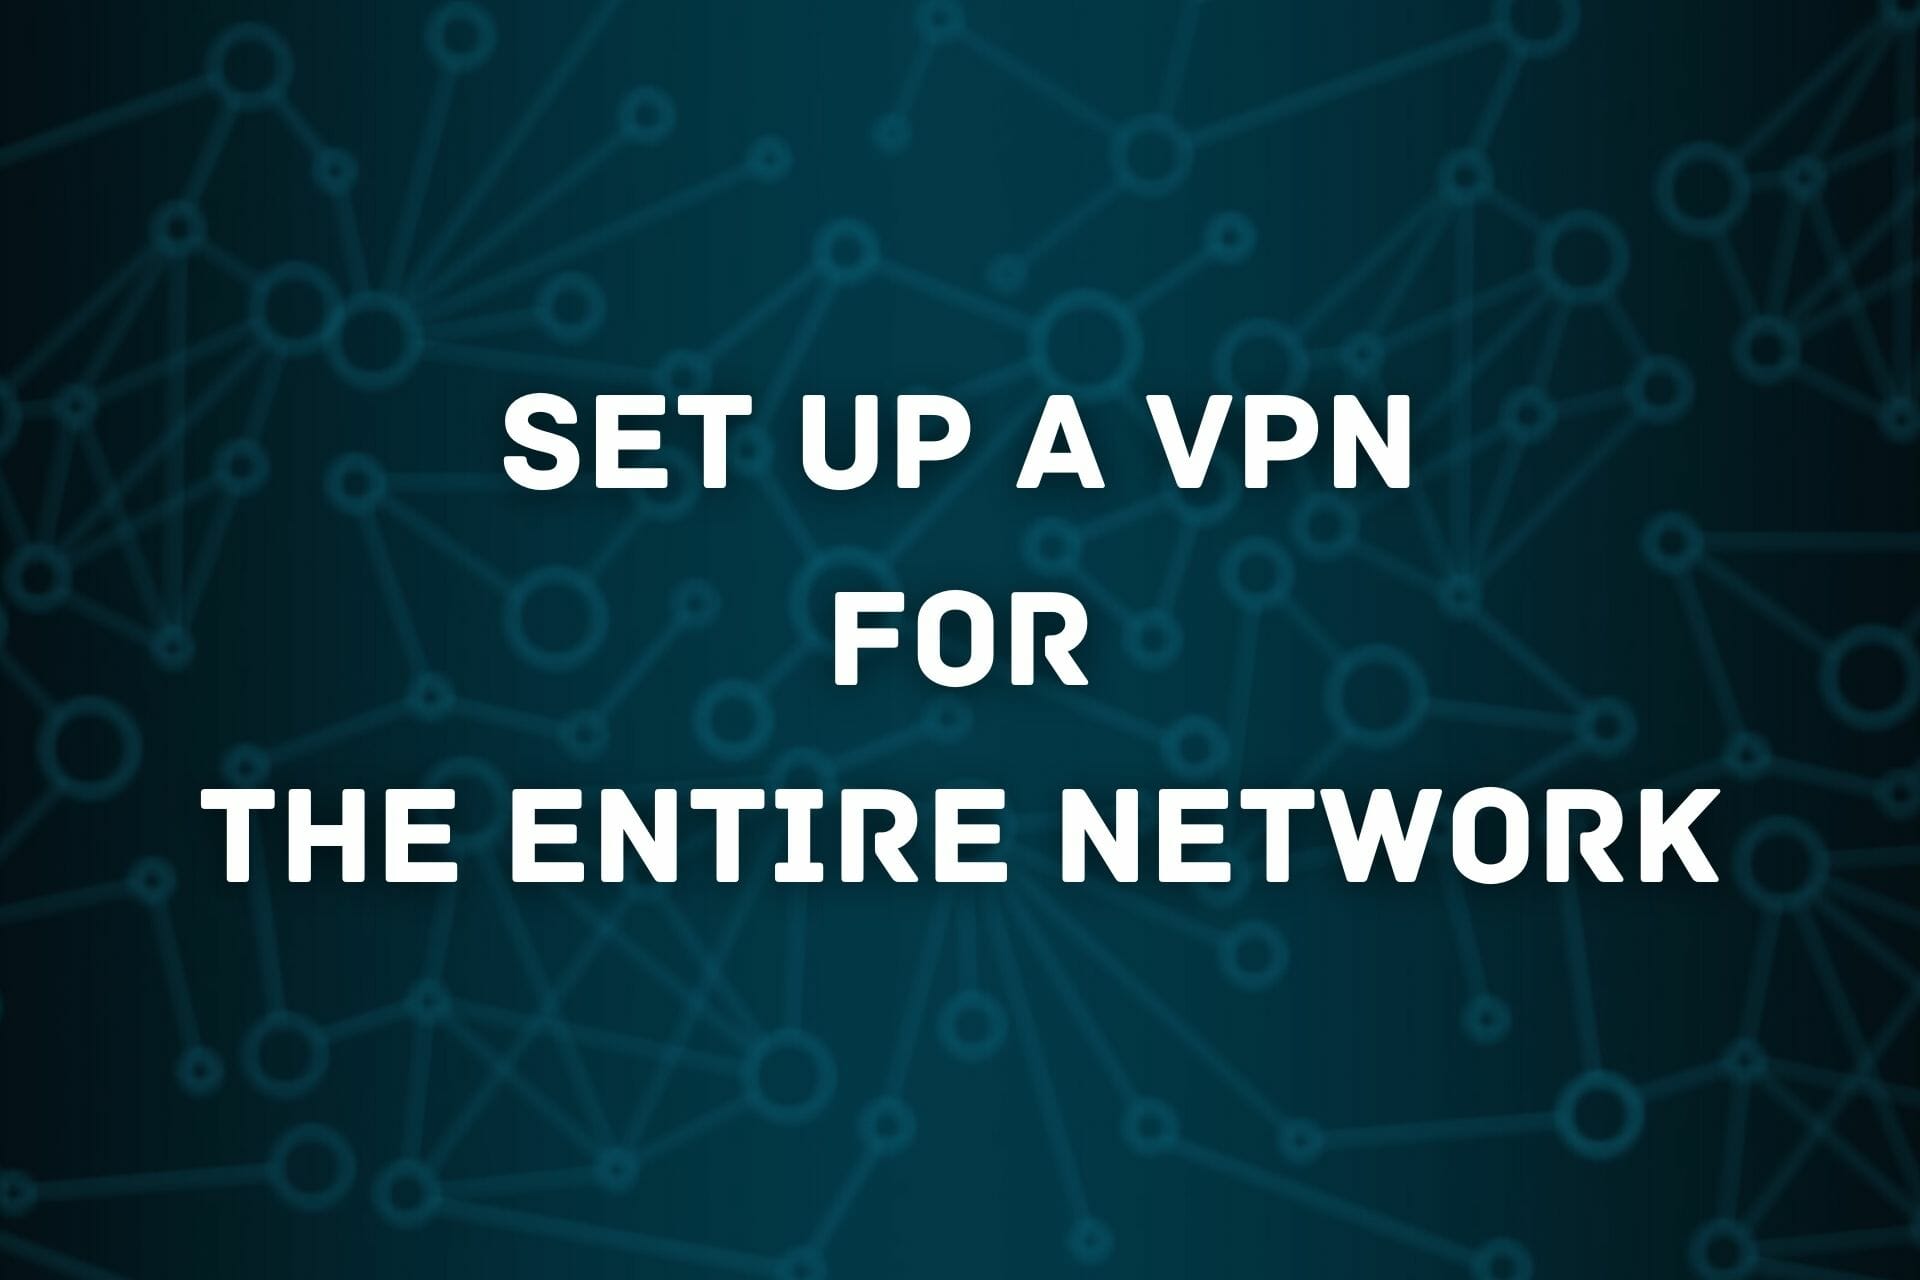 VPN for entire network